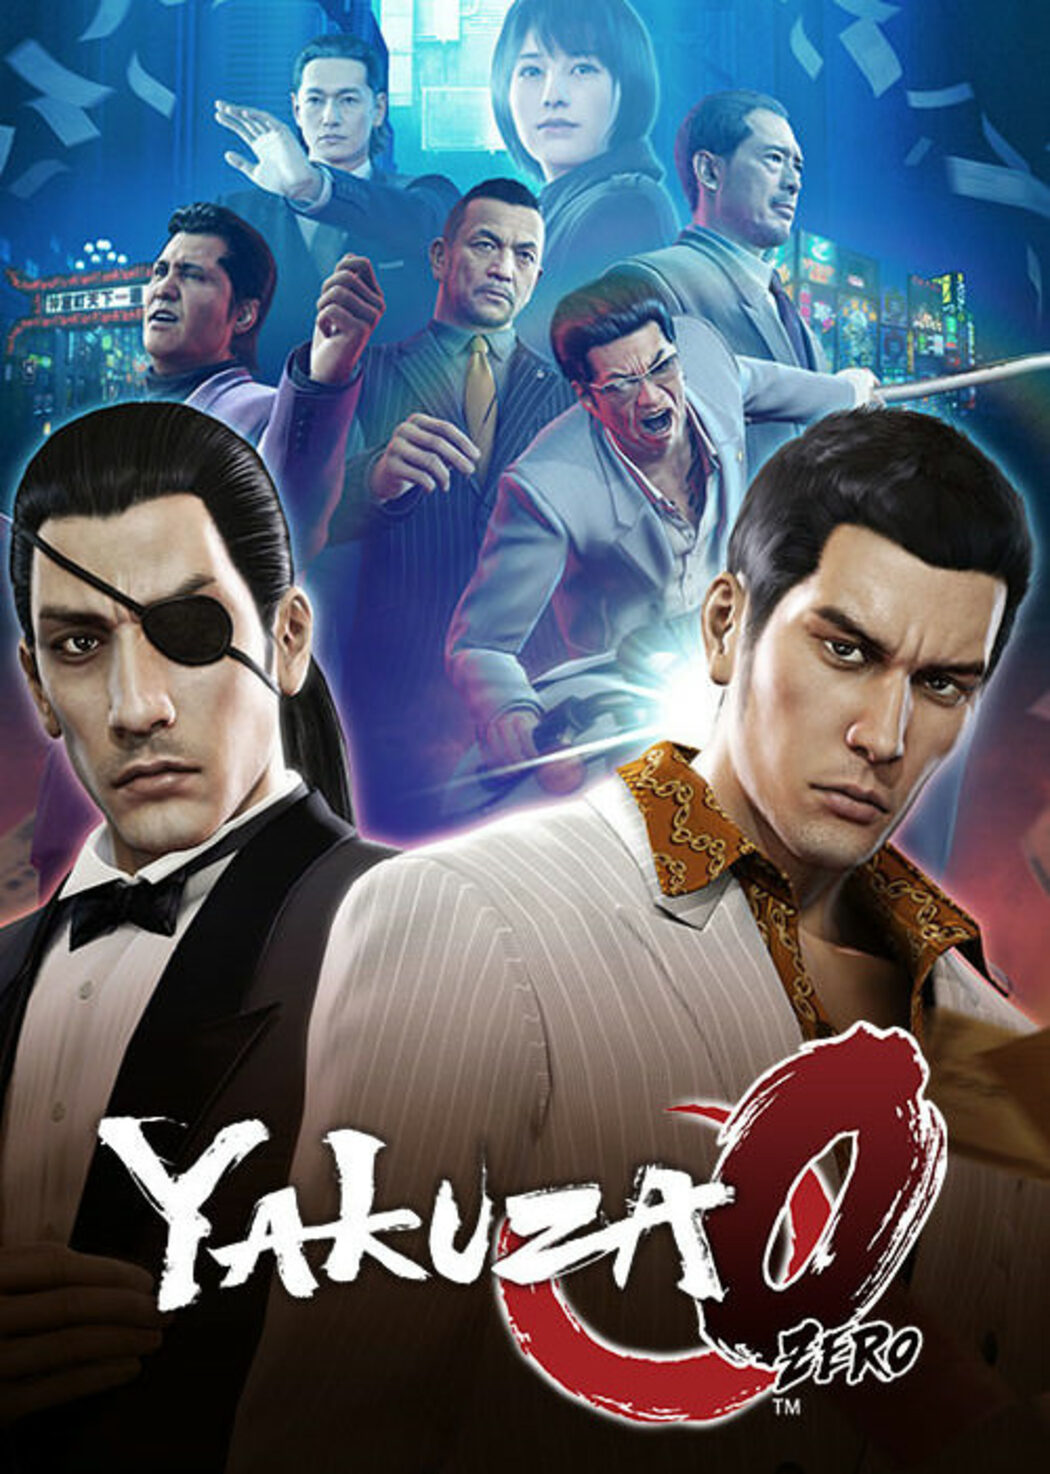 Buy Yakuza 0 CD Key for PC at an even Better Price! | ENEBA